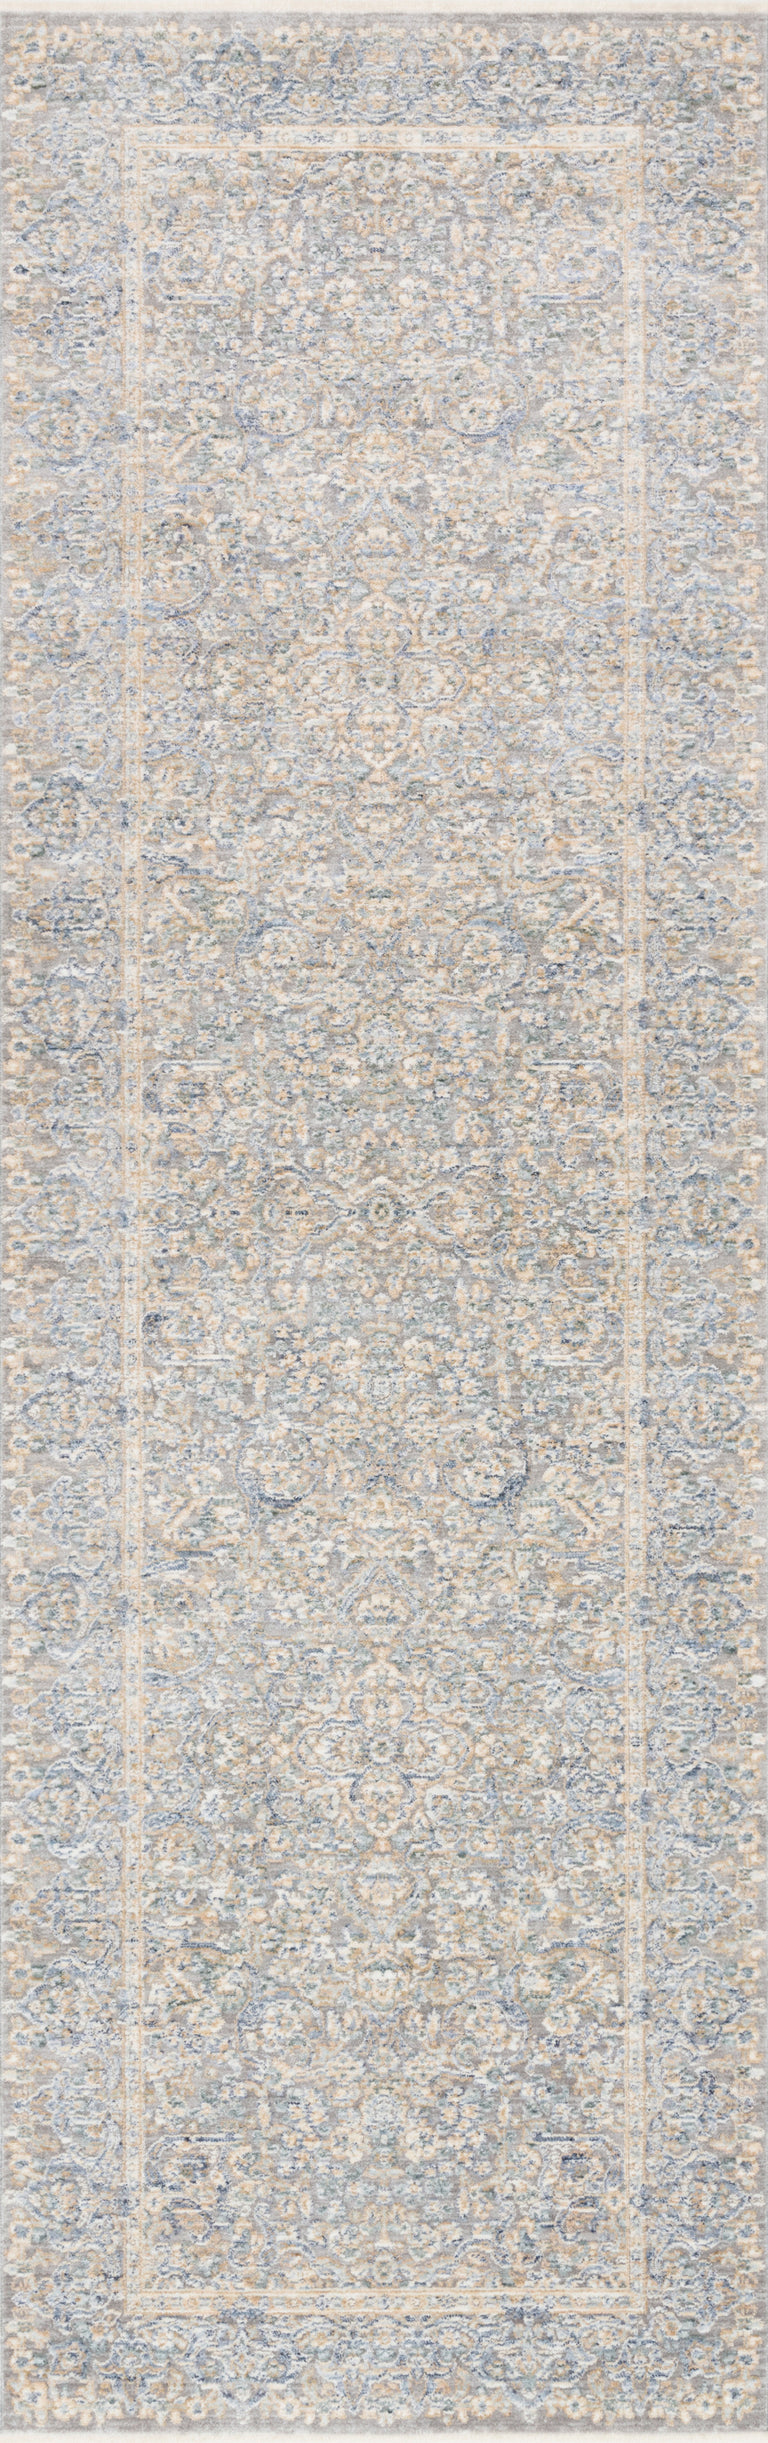 Loloi Rugs Pandora Collection Rug in Stone, Gold - 6'3" x 8'10"